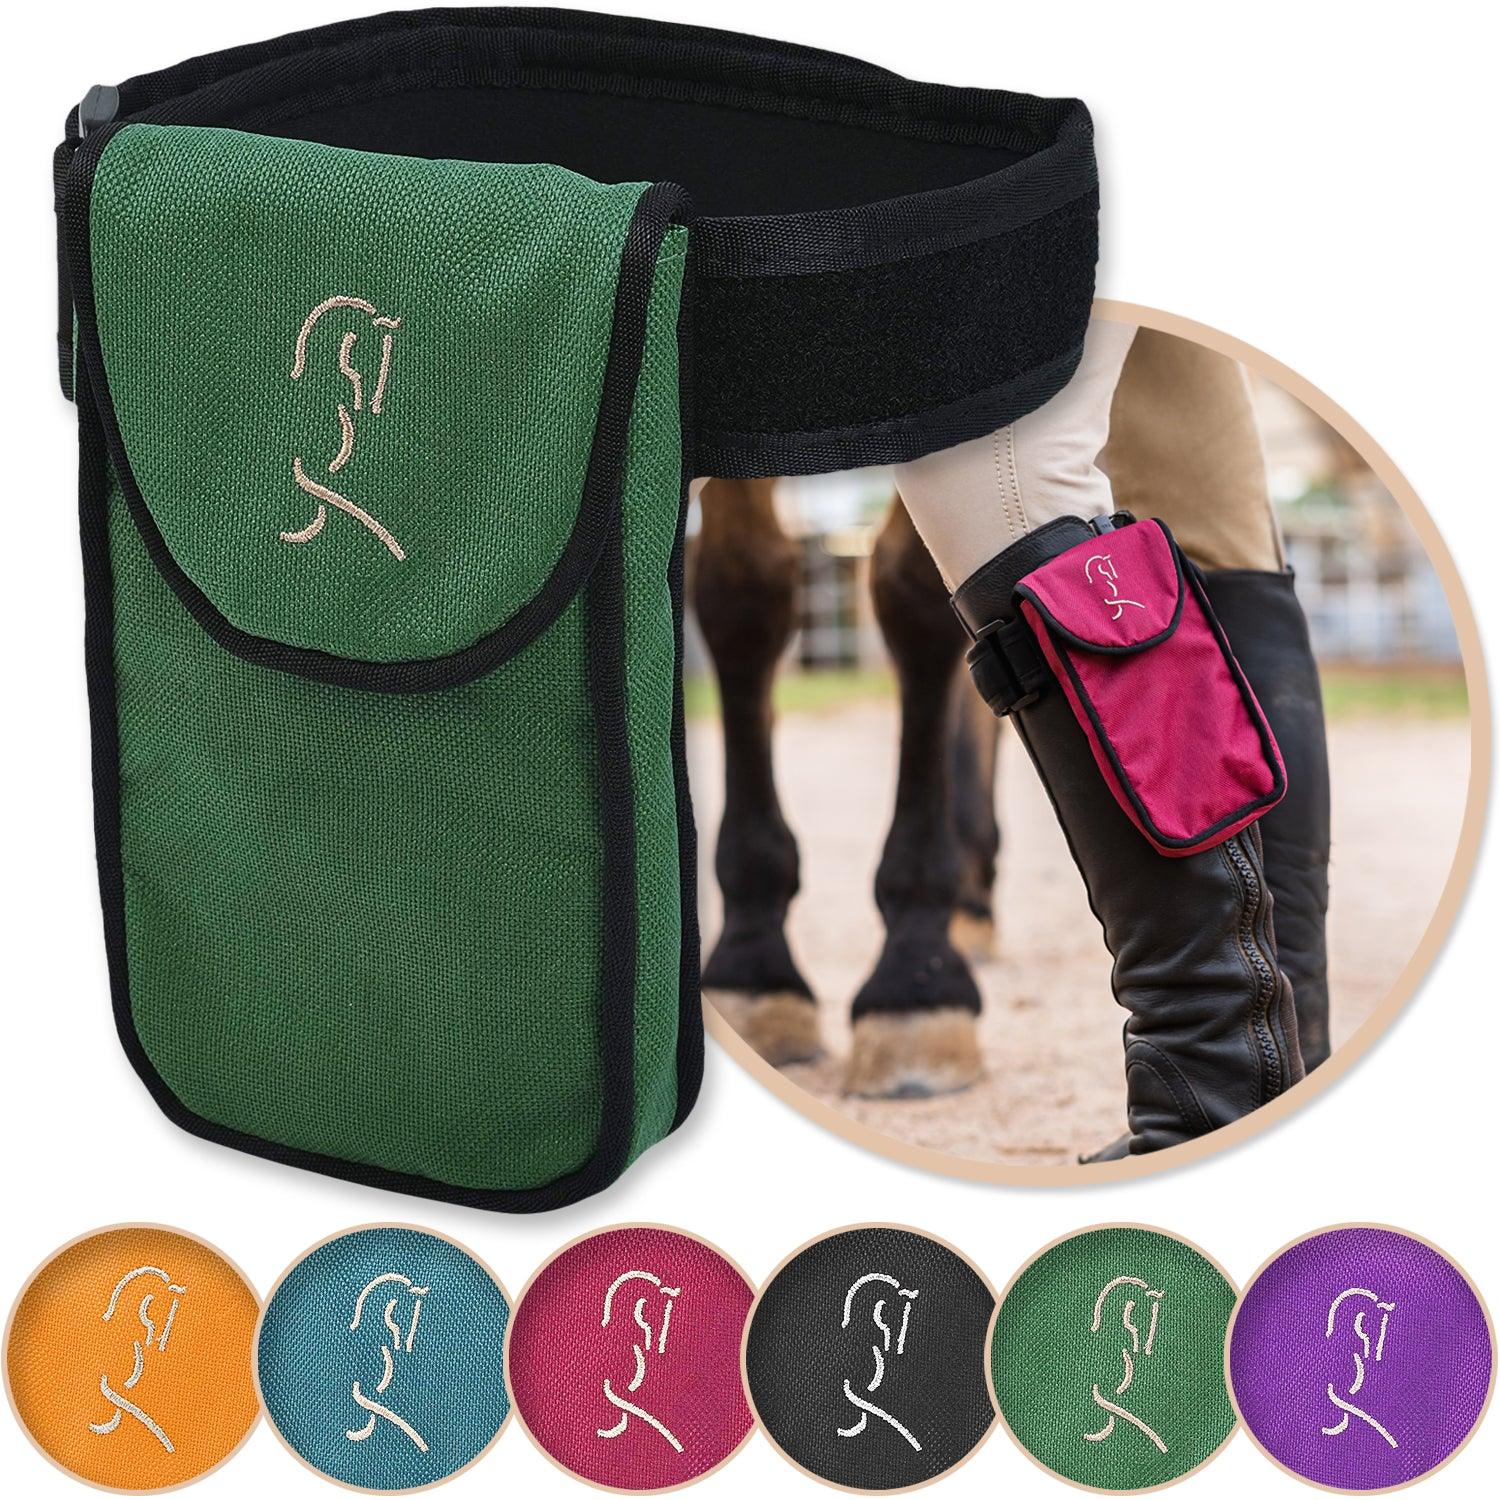 Green equestrian cell phone holder shown with a variety of colors